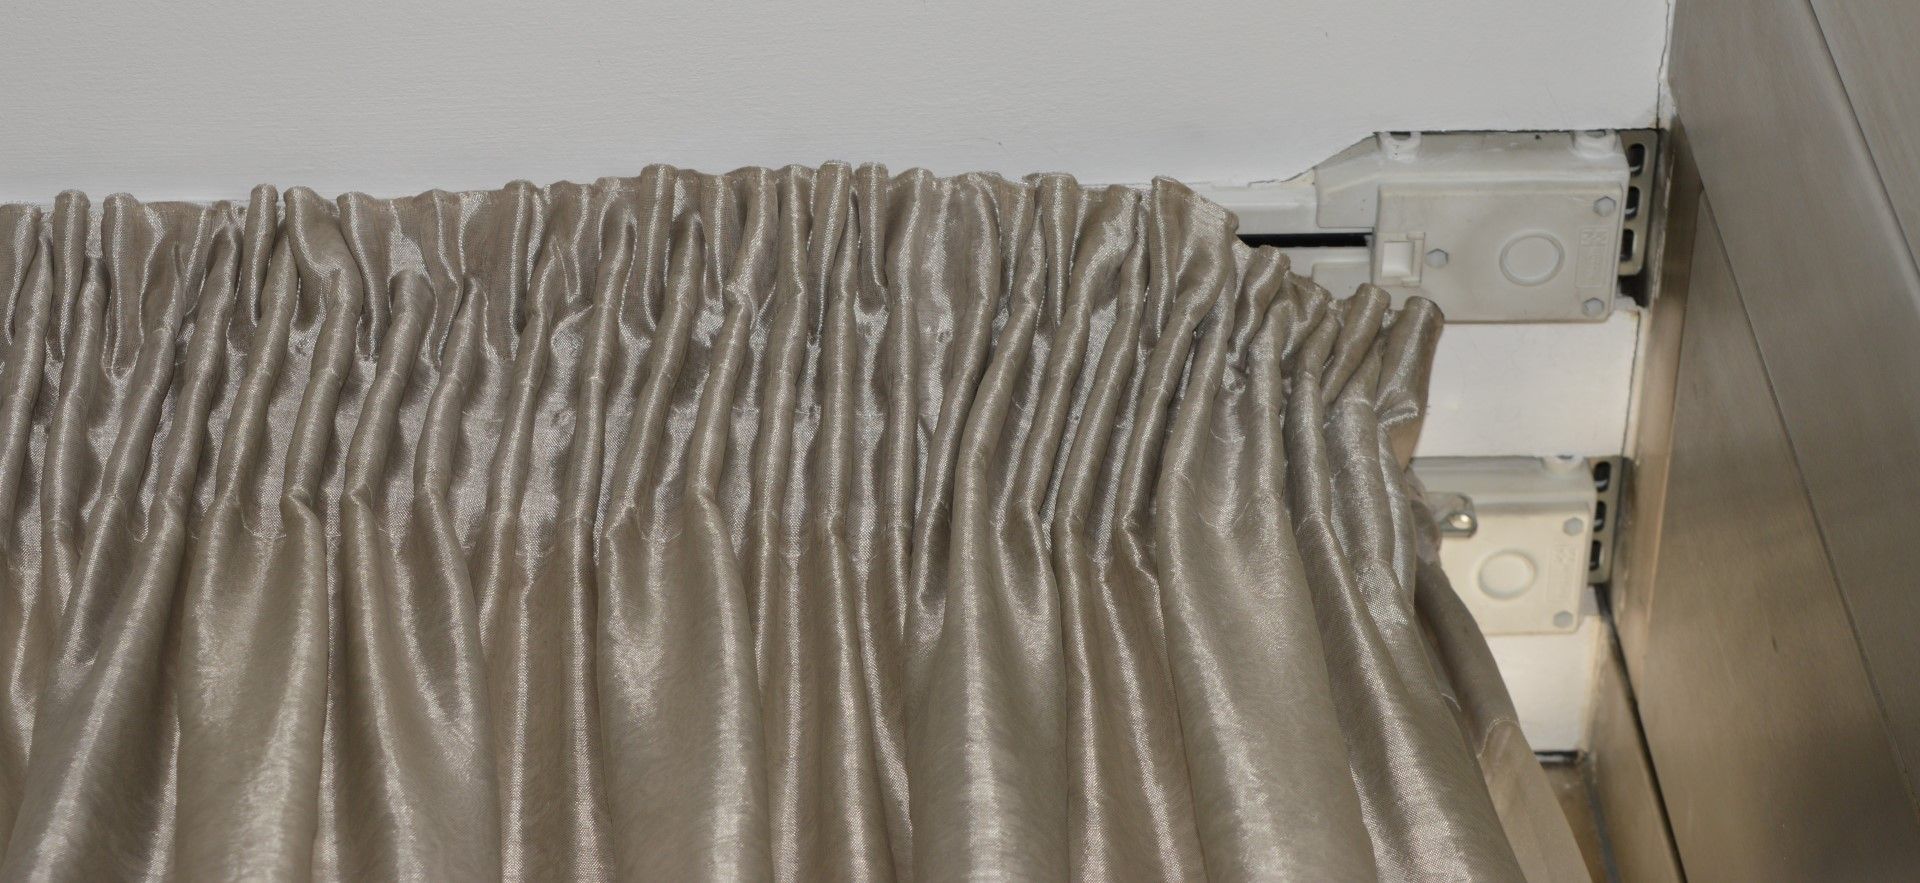 1 x Set of Curtains With Electric Motor - Ref 73 - Approx Length 800cm x Drop 307 cms - CL230 - - Image 7 of 7